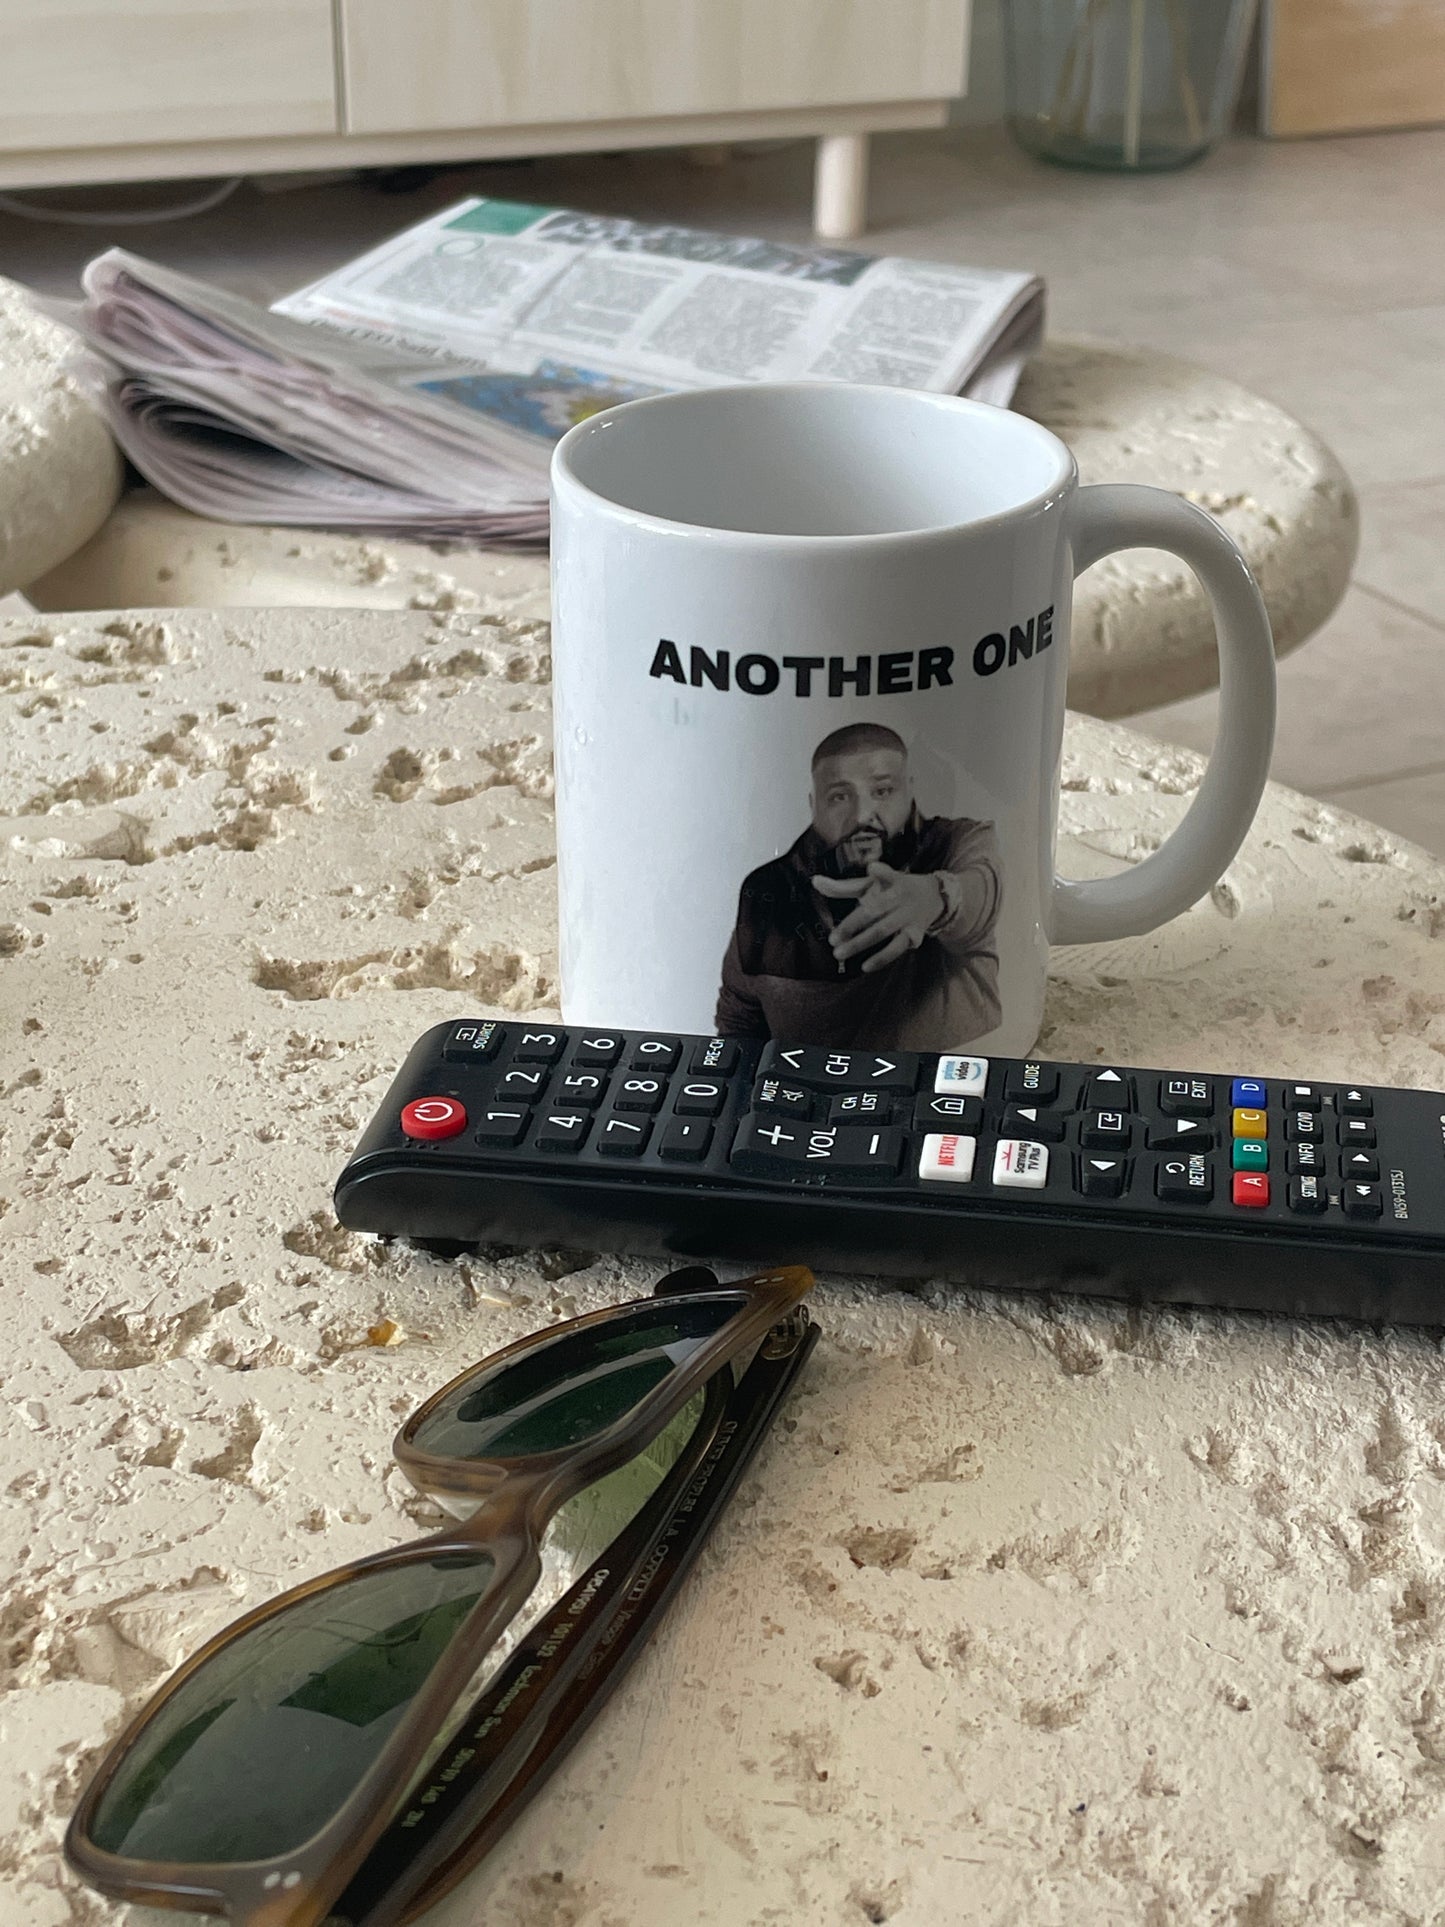 DJ Khaled Another One (another cup of coffee) mug